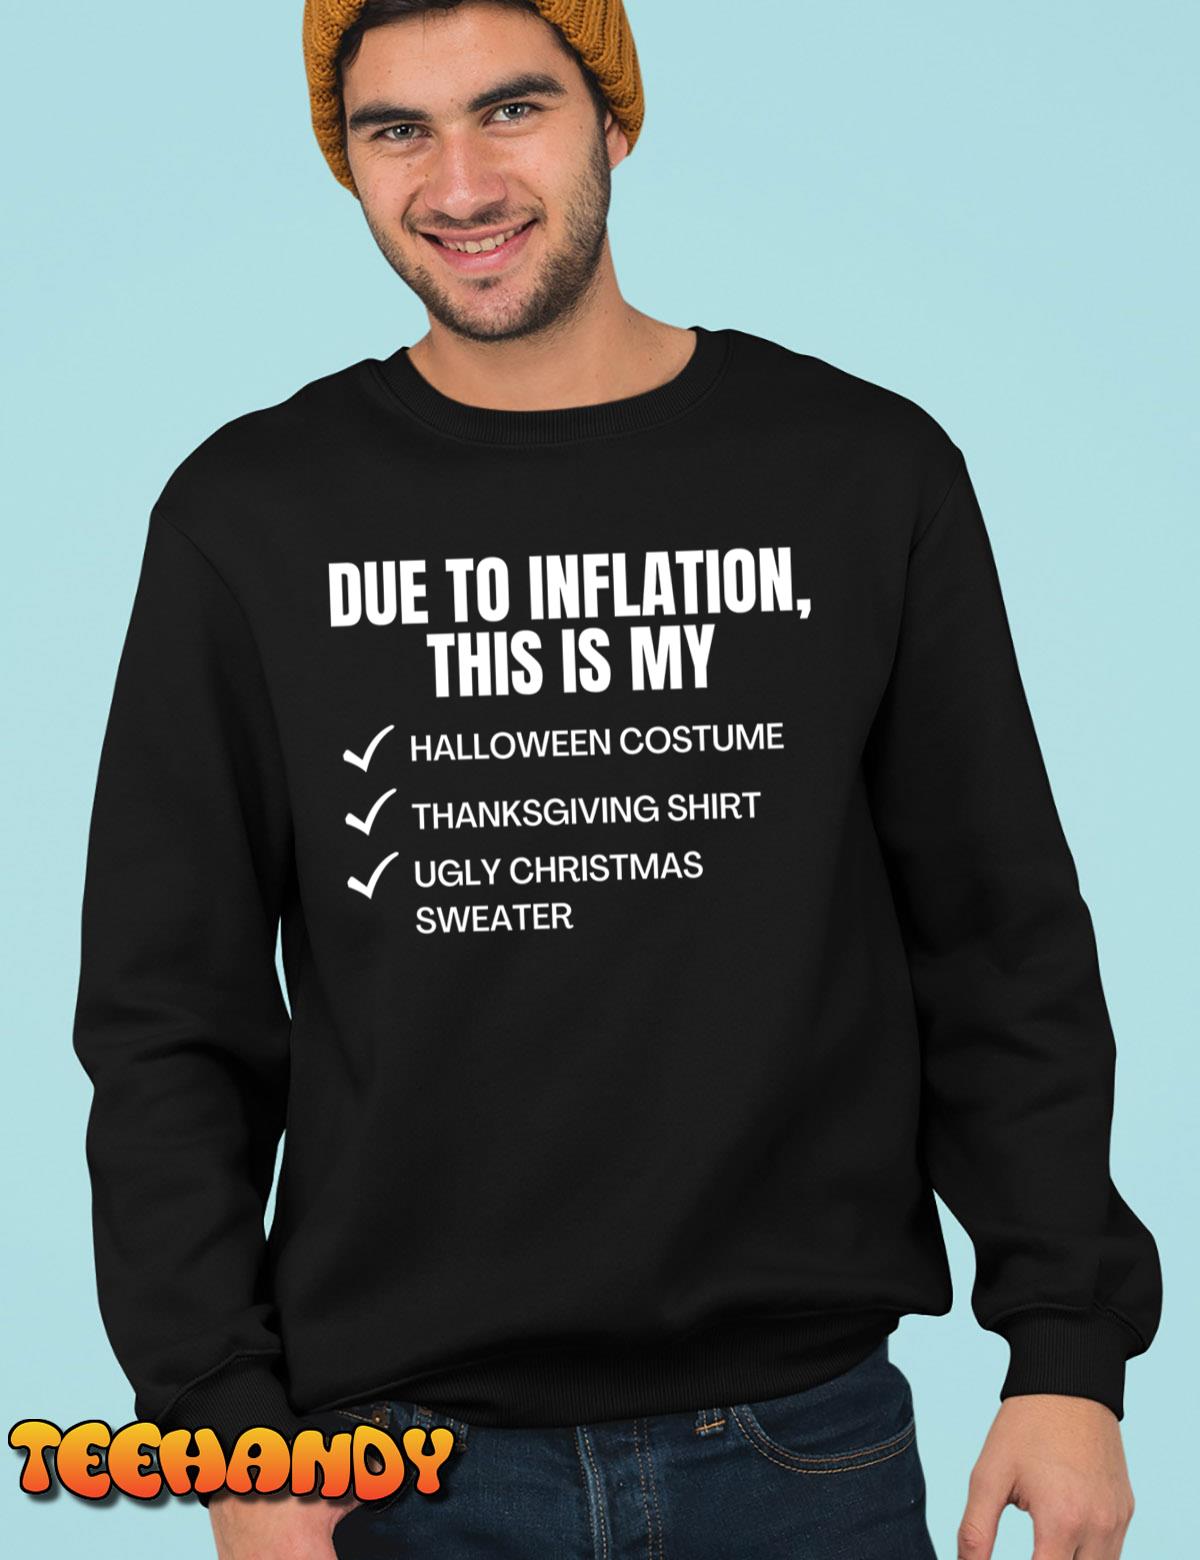 Due to Inflation, This is My Halloween, TDay, Christmas Sweatshirt